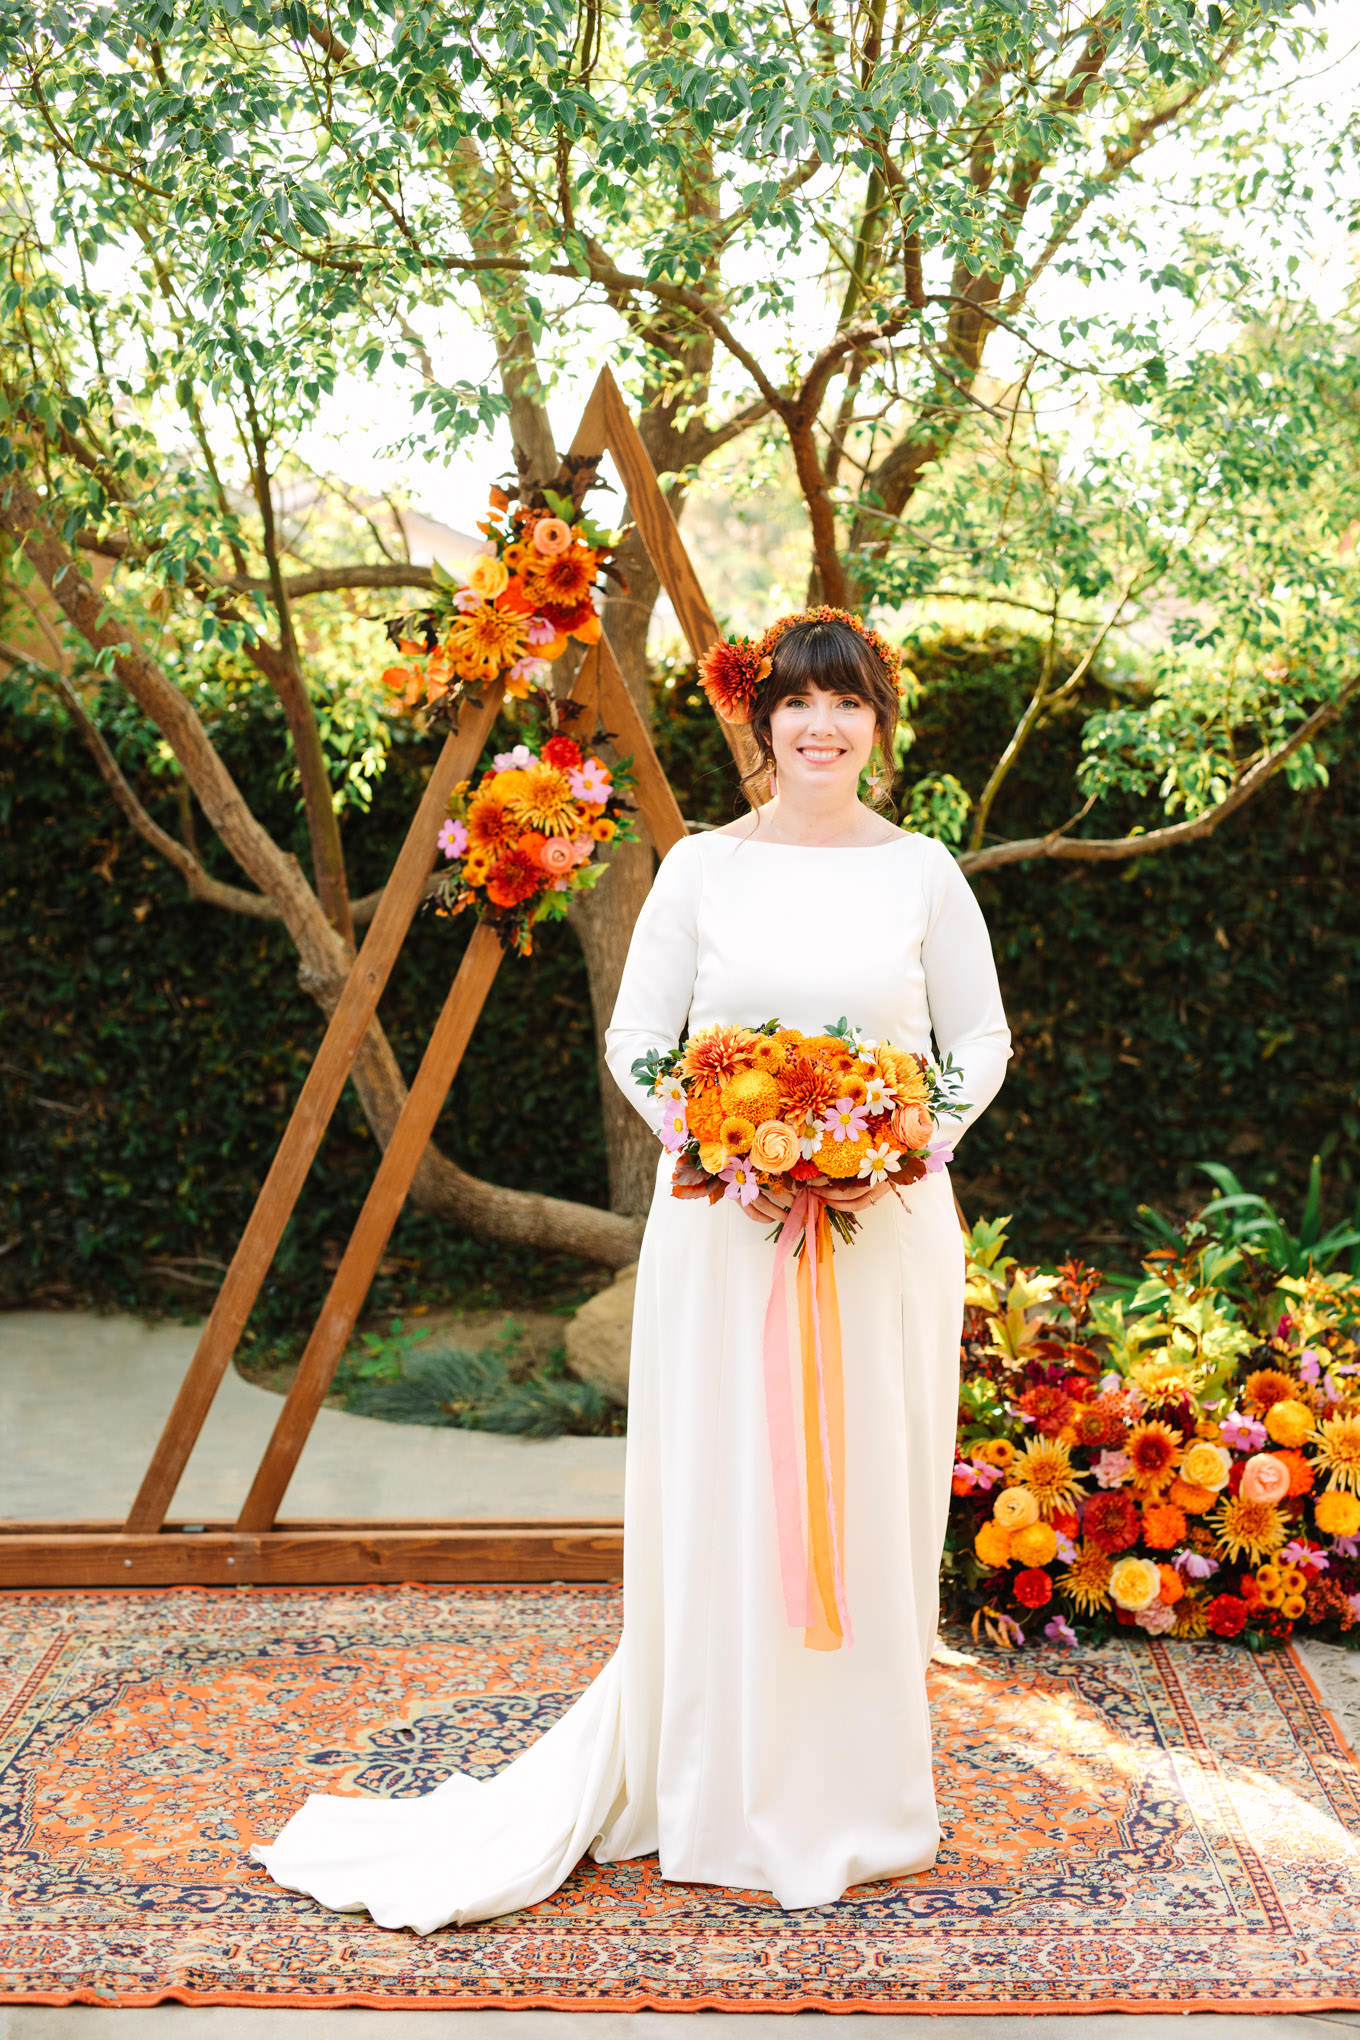 Bride in front of unique wedding ceremony backdrop | Vibrant backyard micro wedding featured on Green Wedding Shoes | Colorful LA wedding photography | #losangeleswedding #backyardwedding #microwedding #laweddingphotographer Source: Mary Costa Photography | Los Angeles